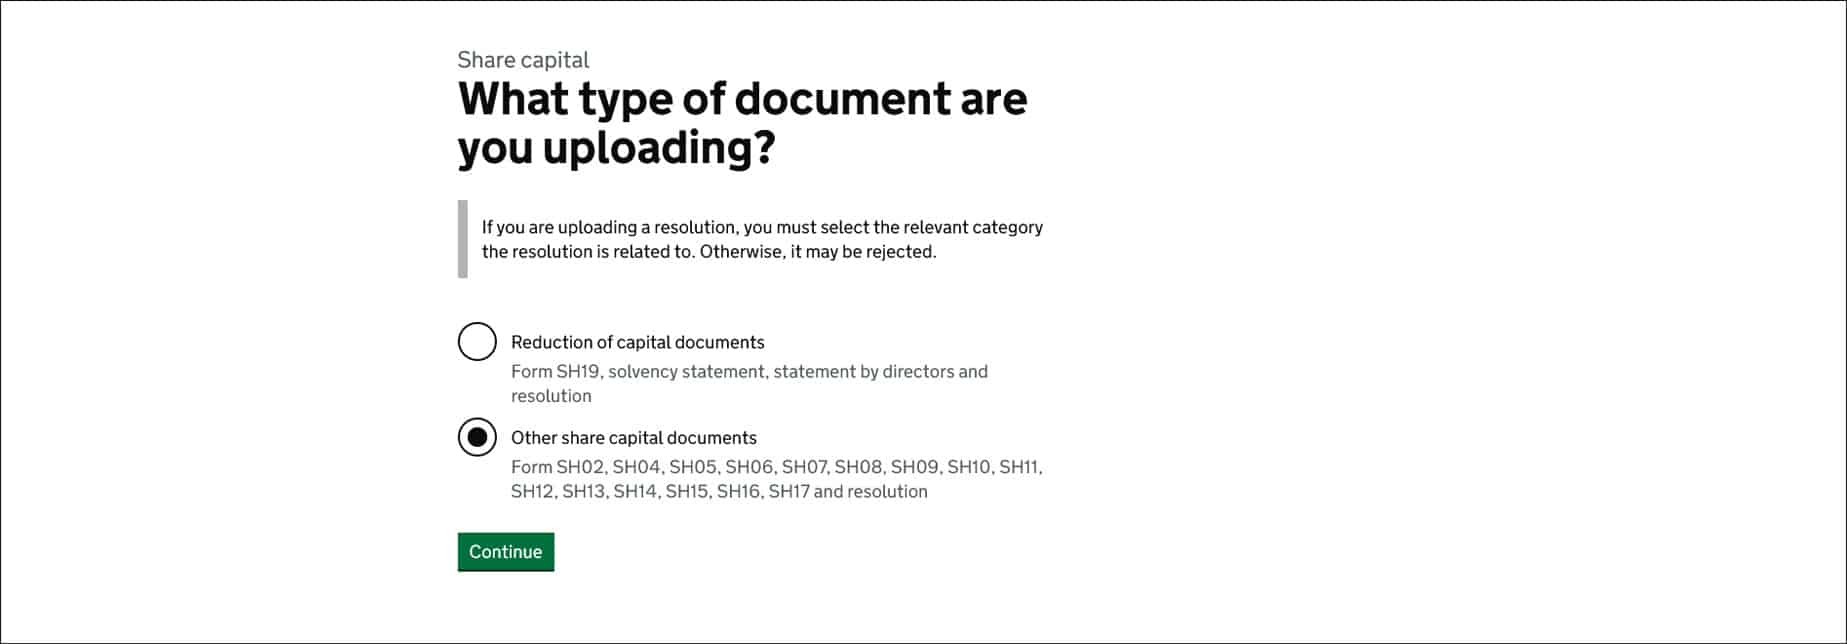 What type of document are you uploading?